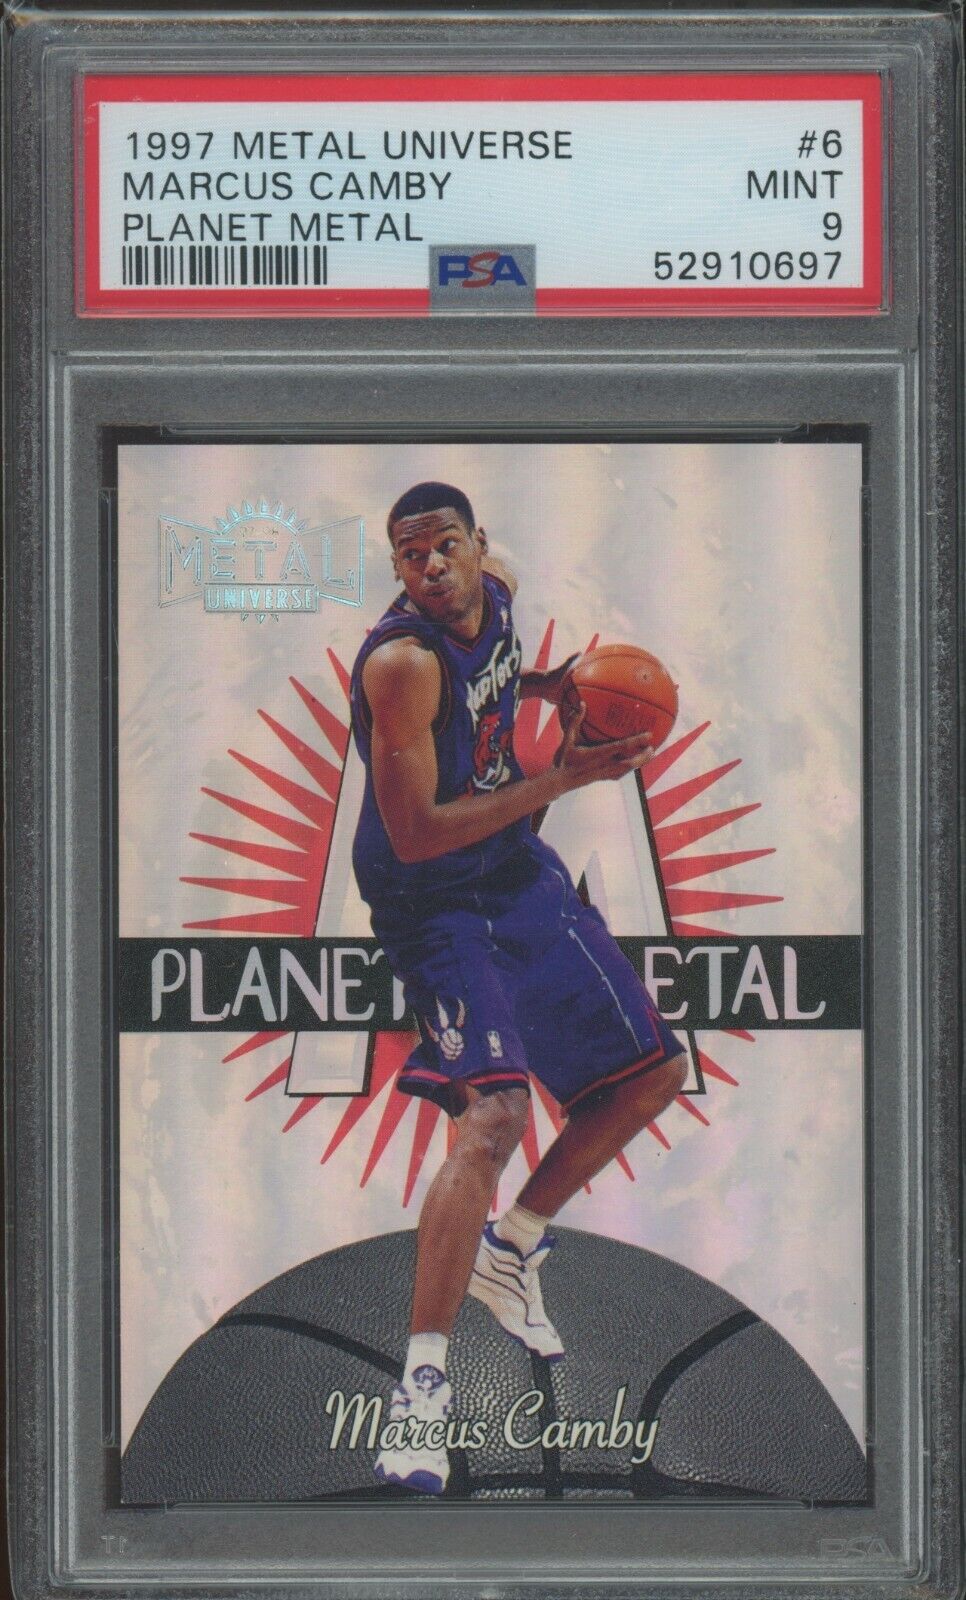 1997-98 Metal Universe Planet Metal #6 Marcus Camby PSA 9 POP 3 - NONE HIGHER